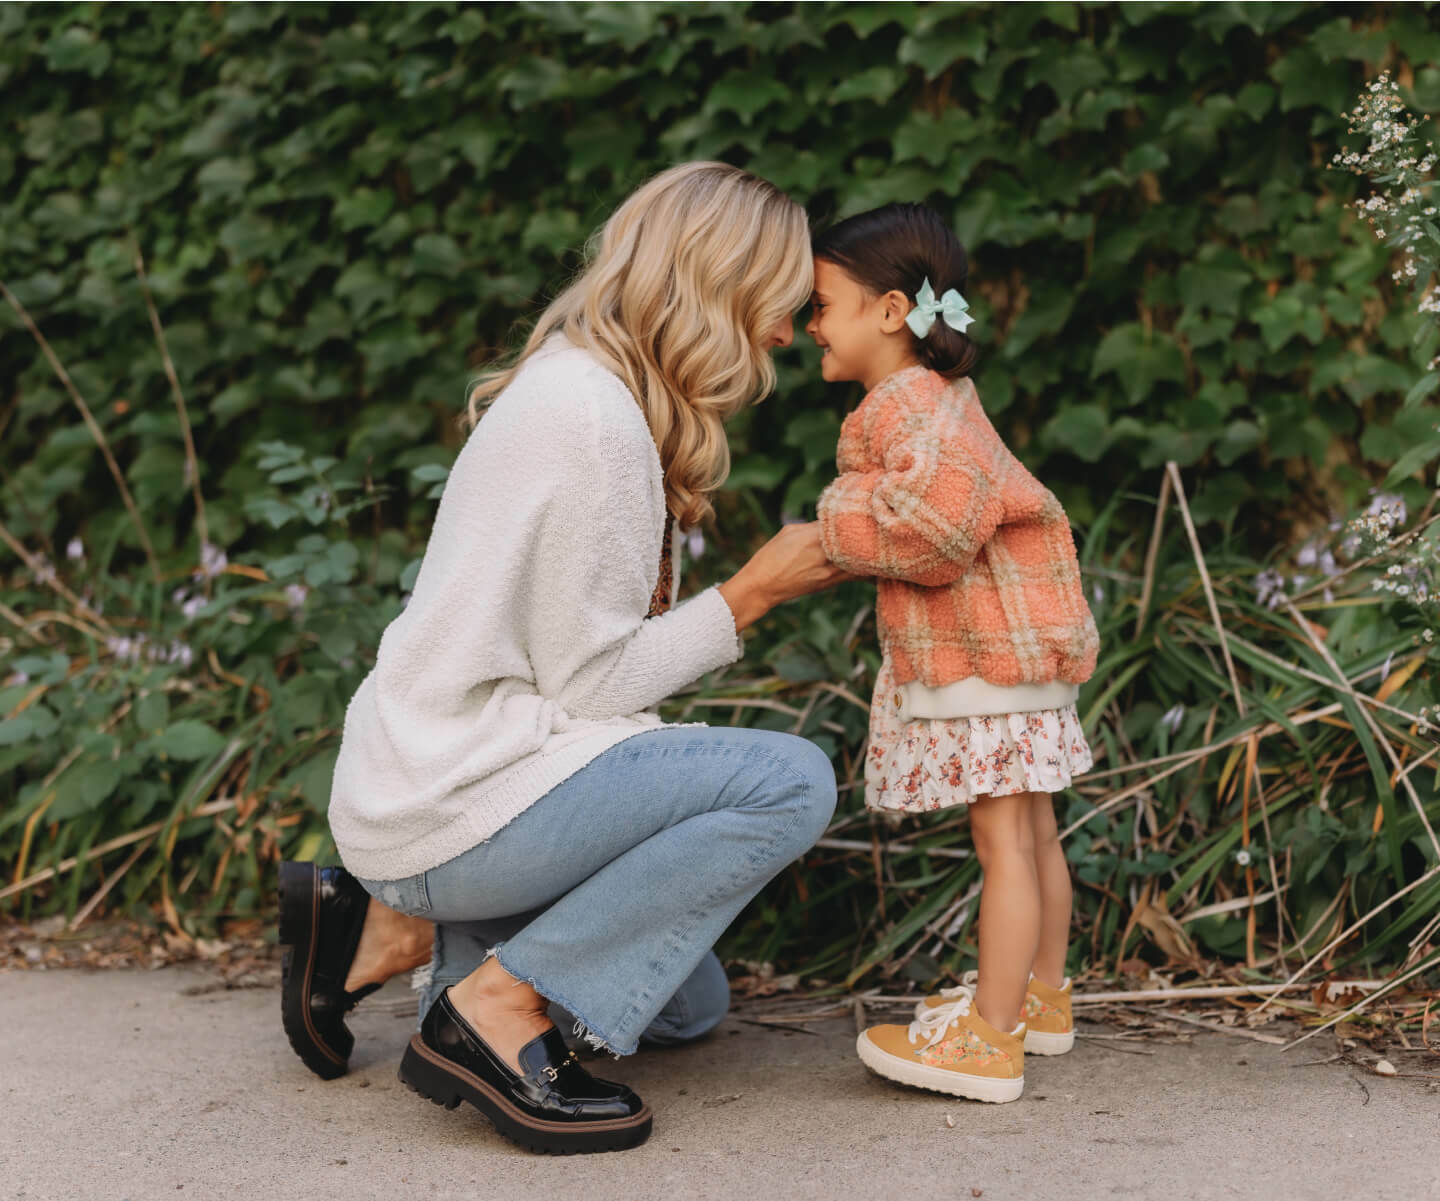 An image of a woman and a little girl affectionately kissing